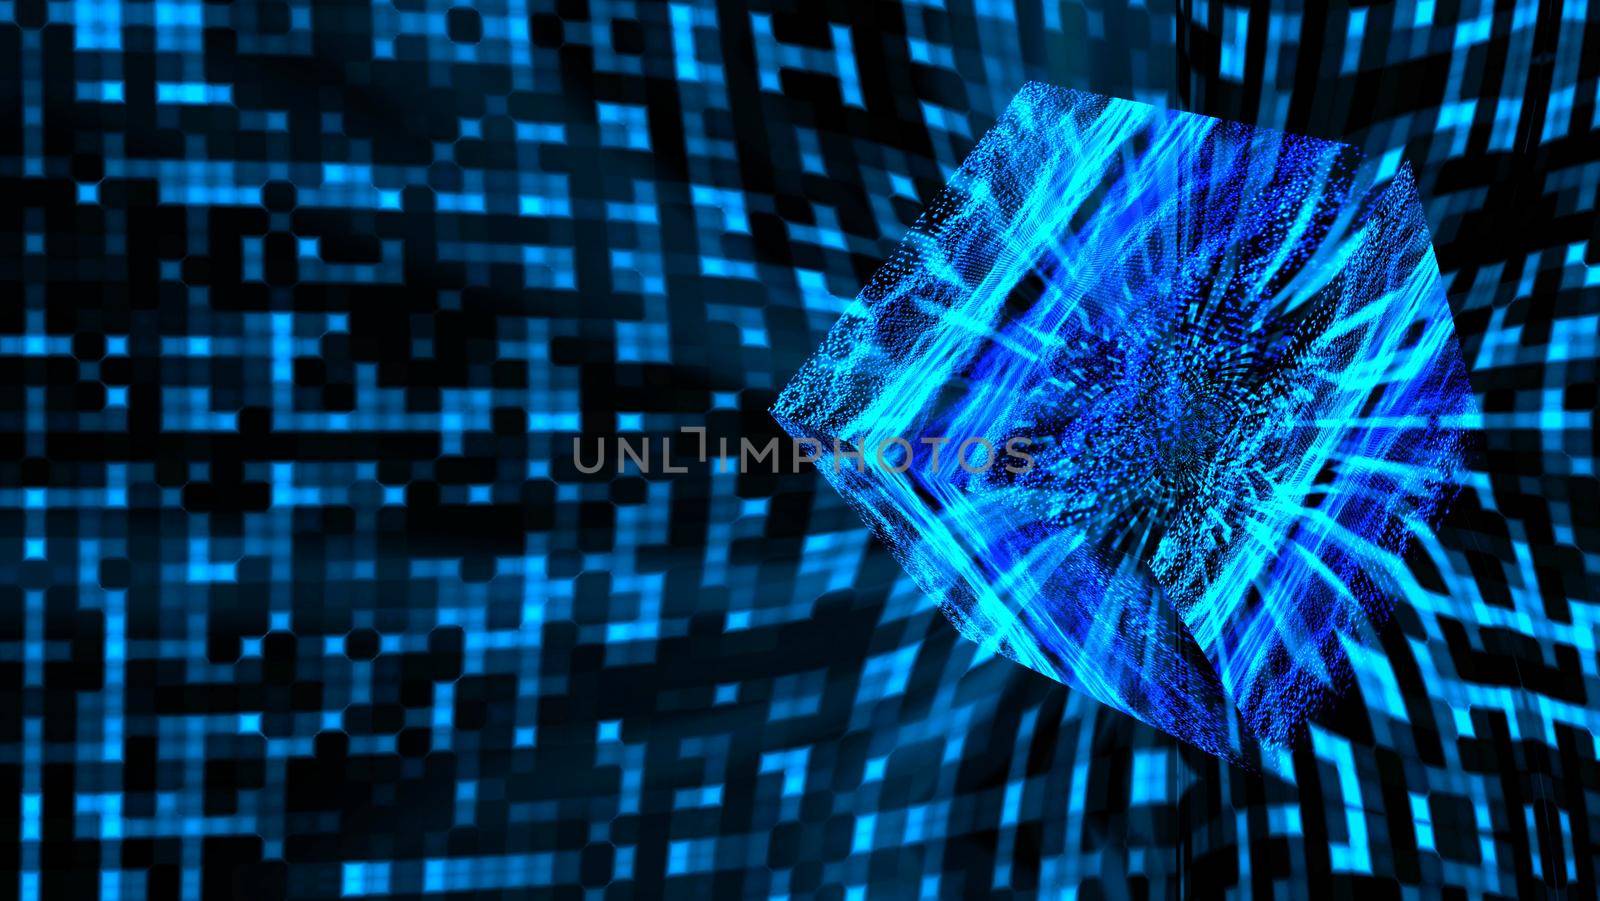 Cube reflection abstract dark cave waveform visualization wave technology digital surface background, animation abstract blue tone square light particles pattern oscillation